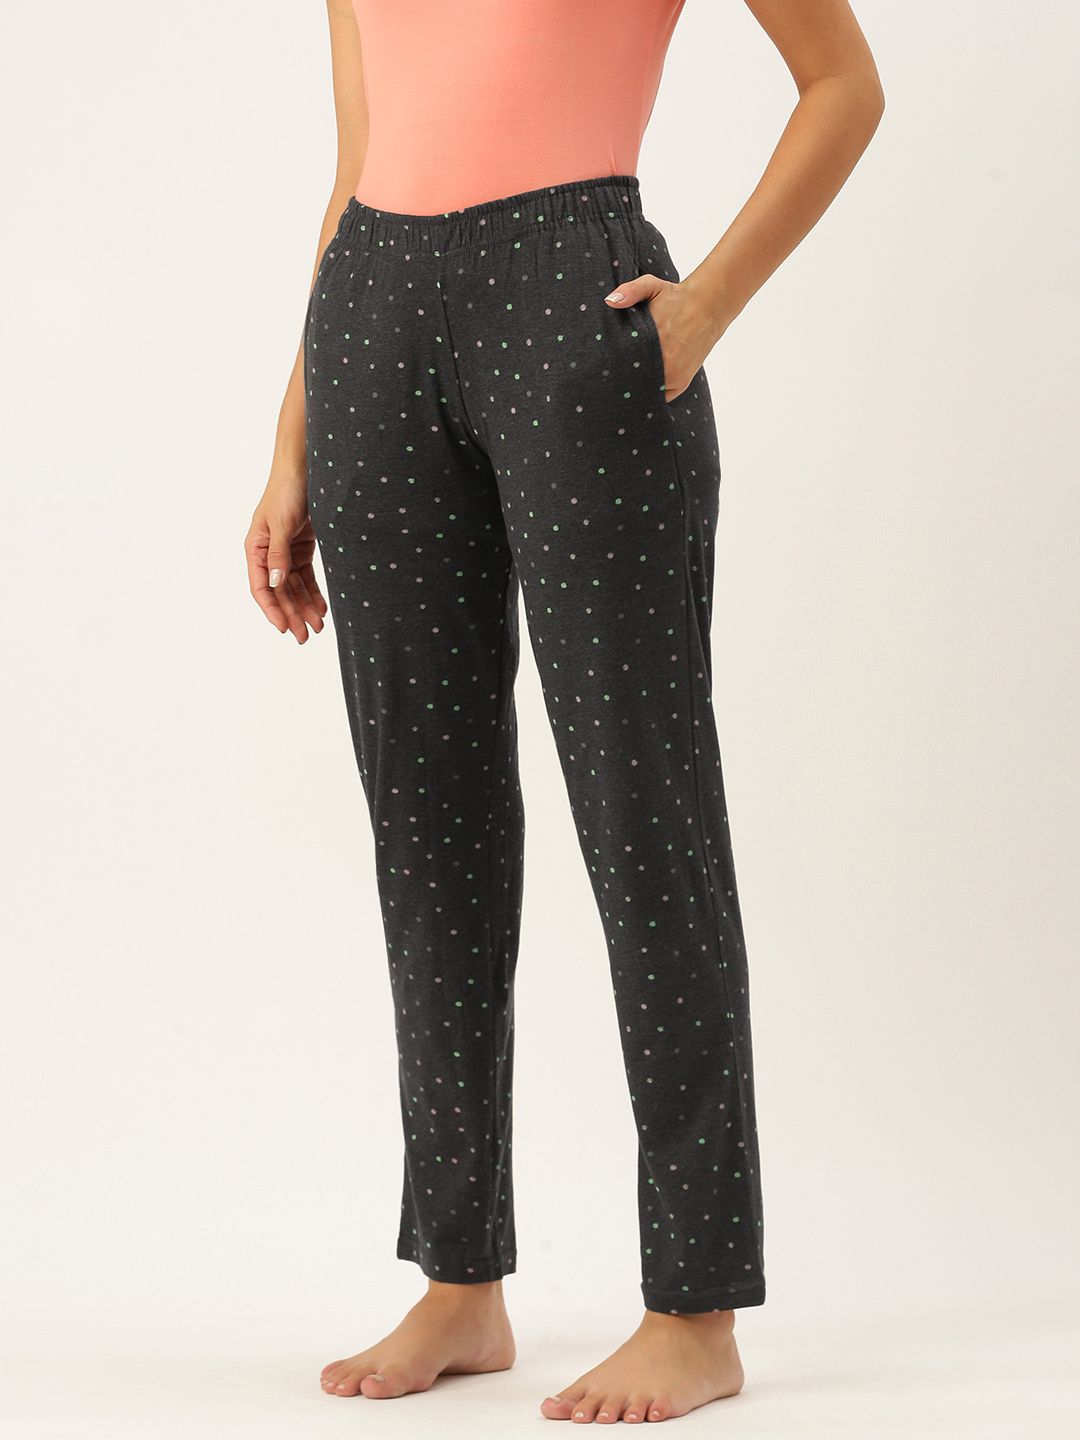 Clt.s Women Charcoal Printed Cotton Lounge Pants Price in India